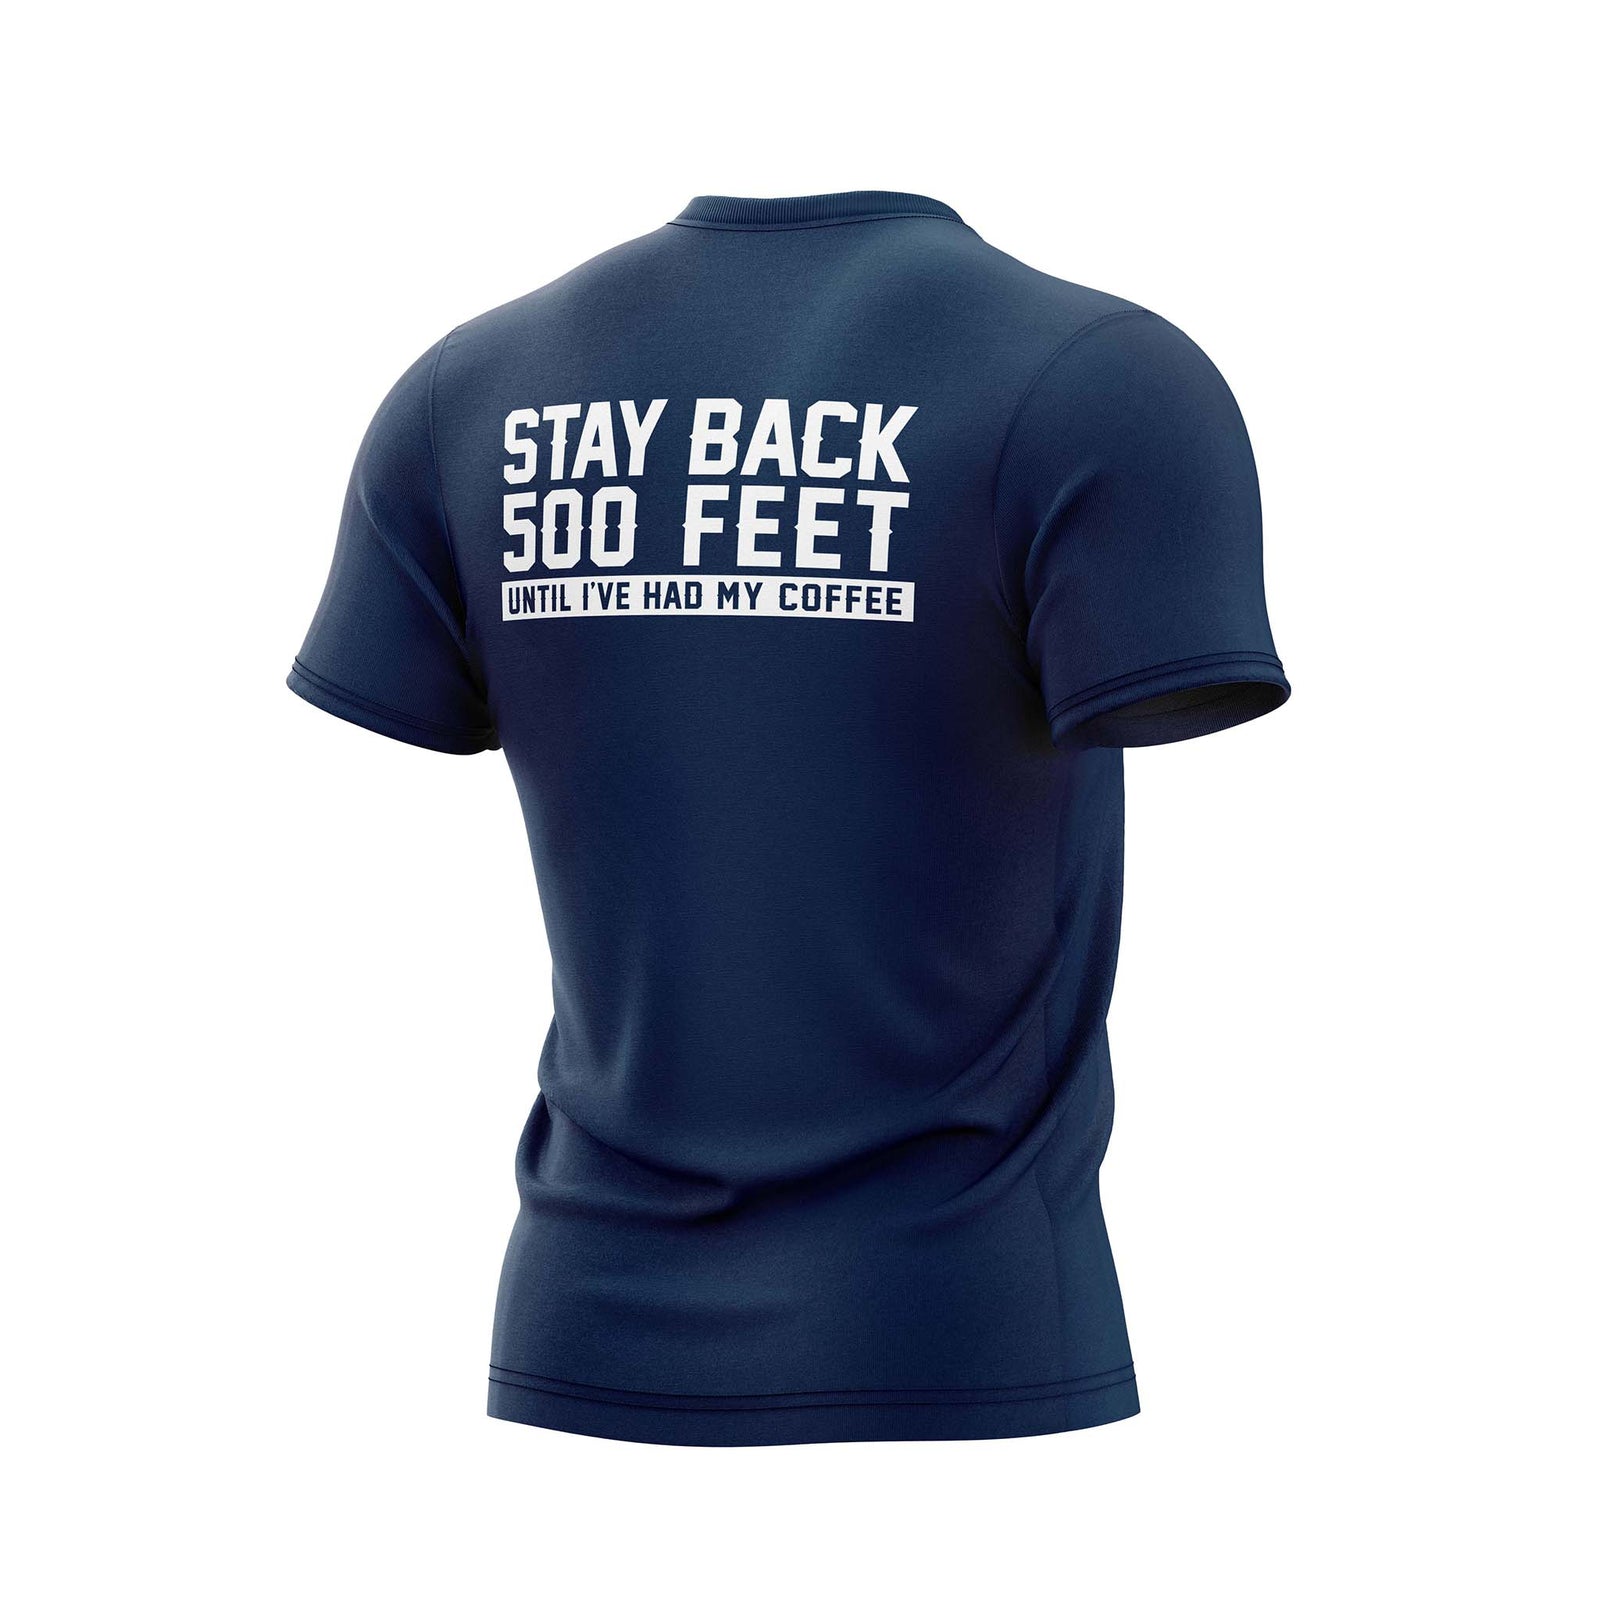 Back side of navy blue t shirt with large white lettering that reads "Stay back 500 feet until I've had my coffee" across the top